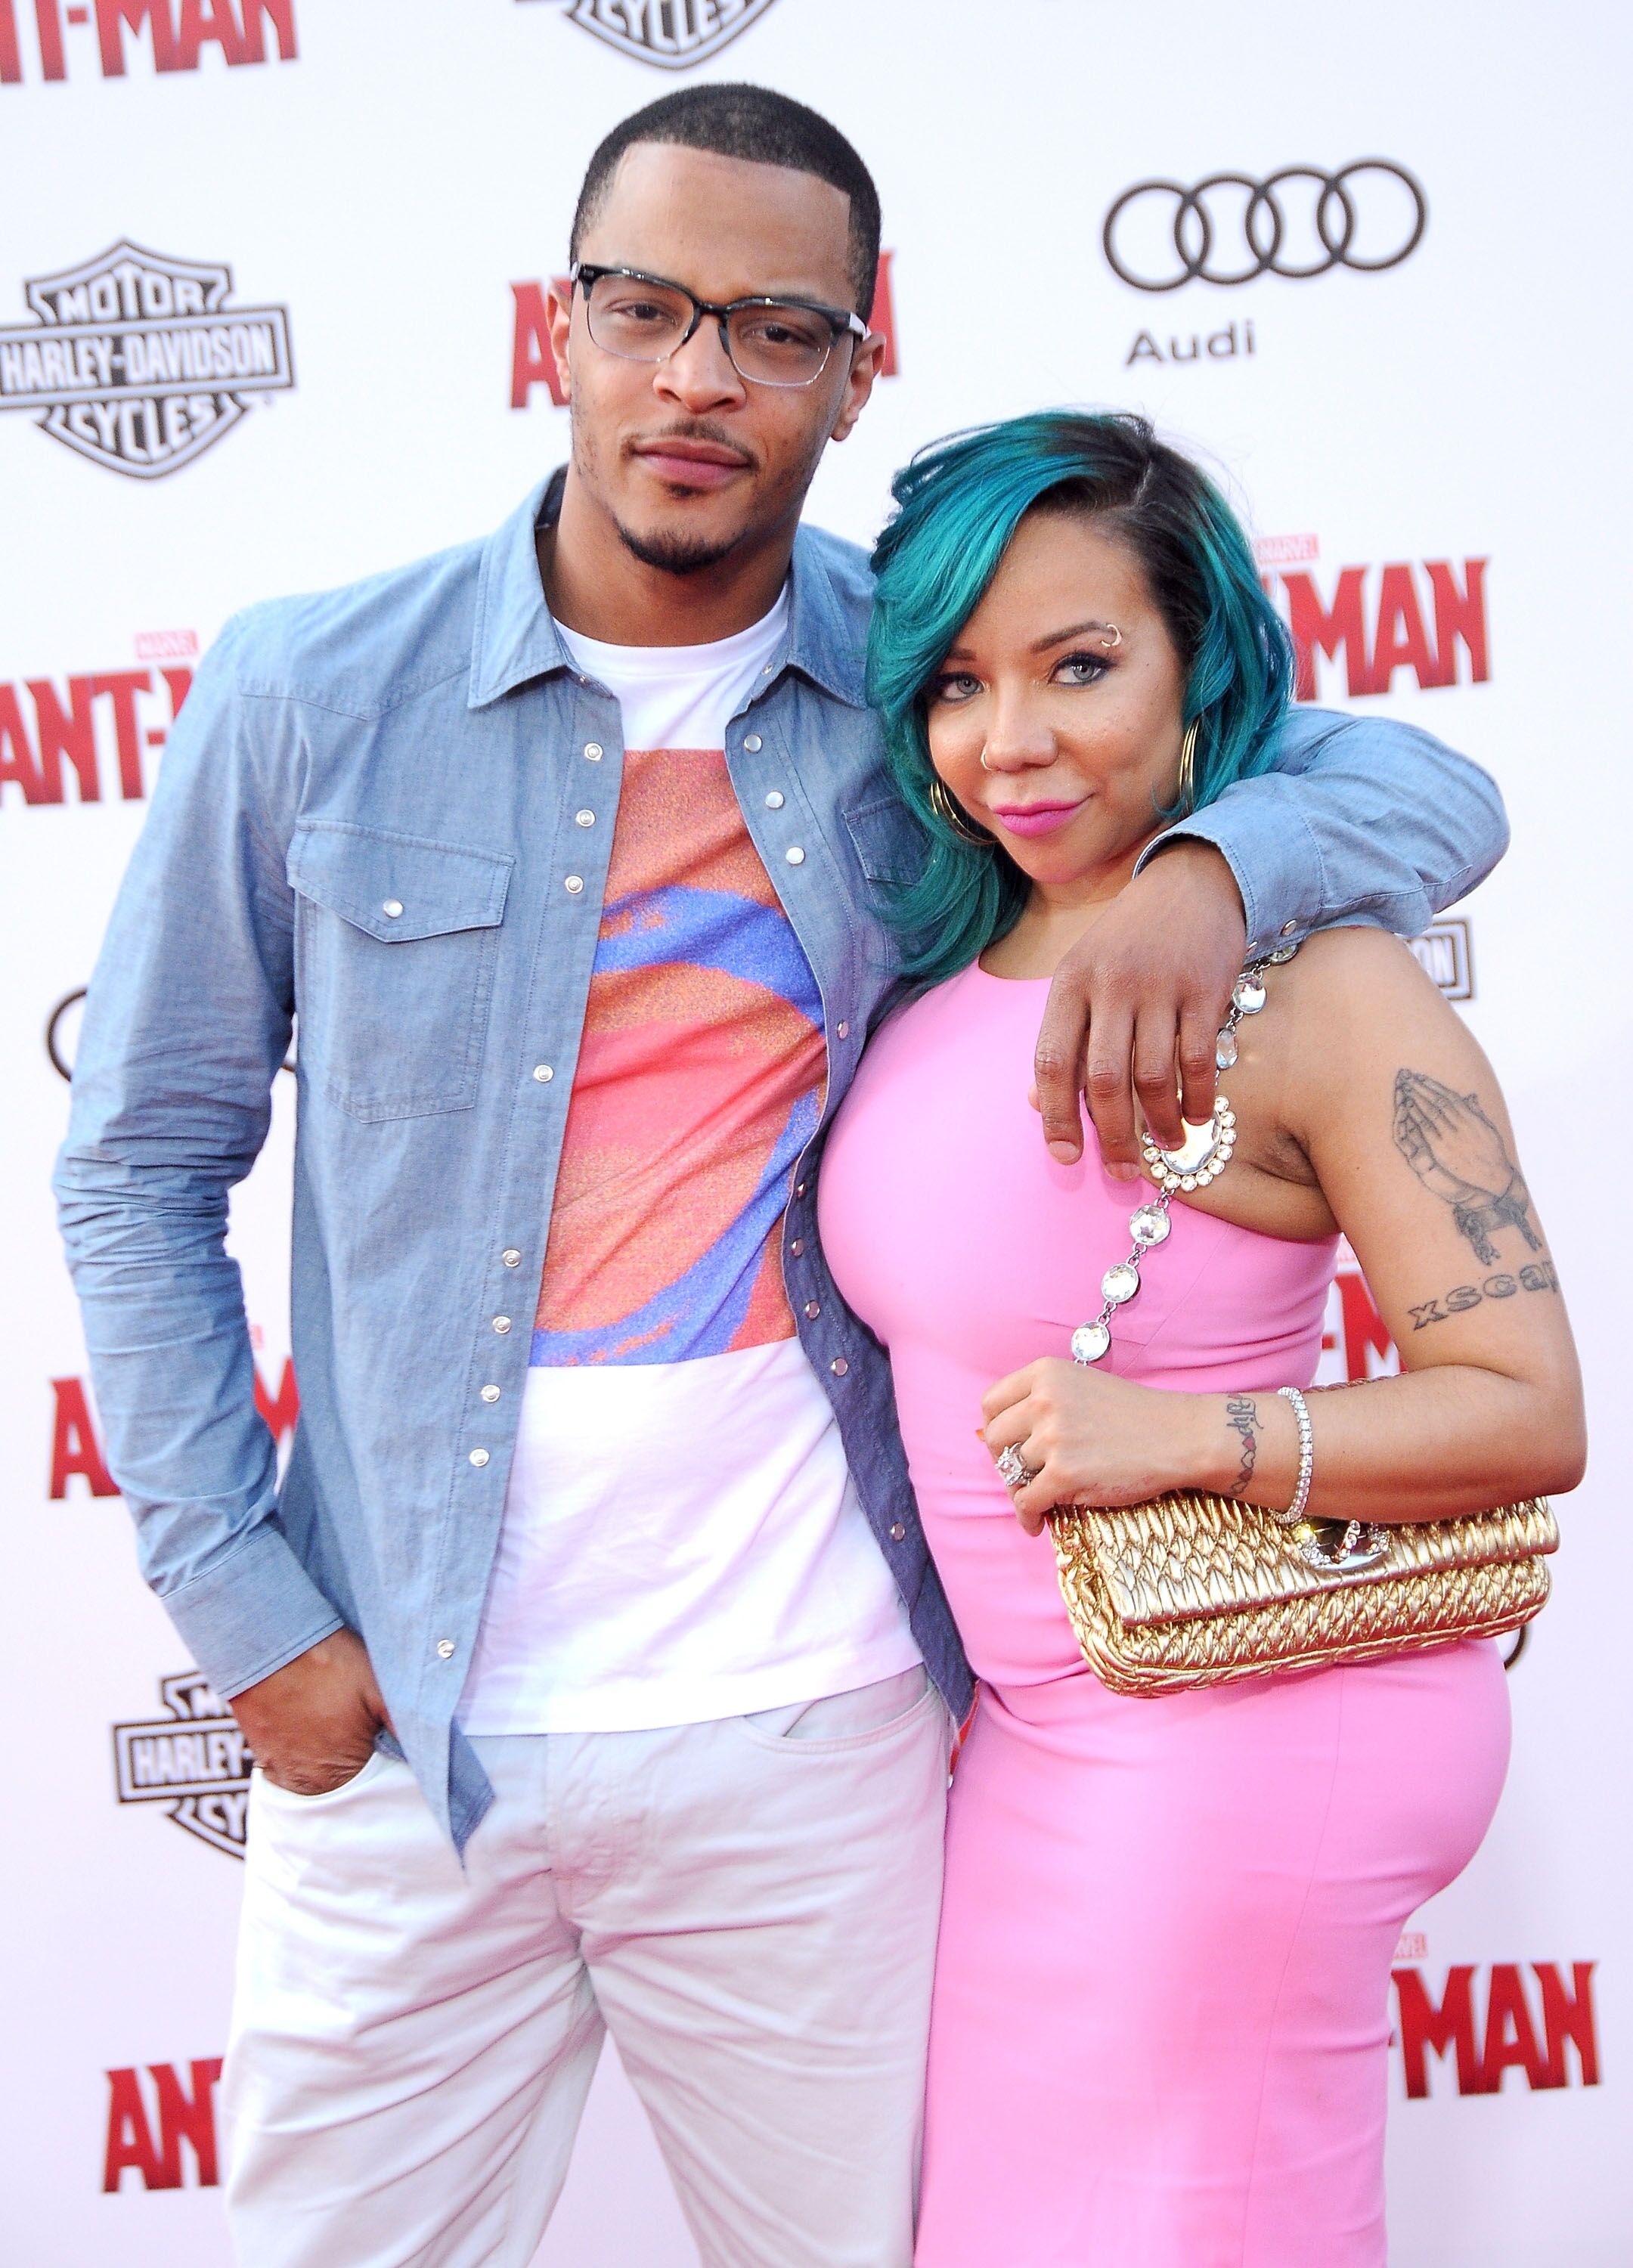 Rapper Tip "T.I." Harris and his wife Tiny at the "Antman" premiere/ Source: Getty Images